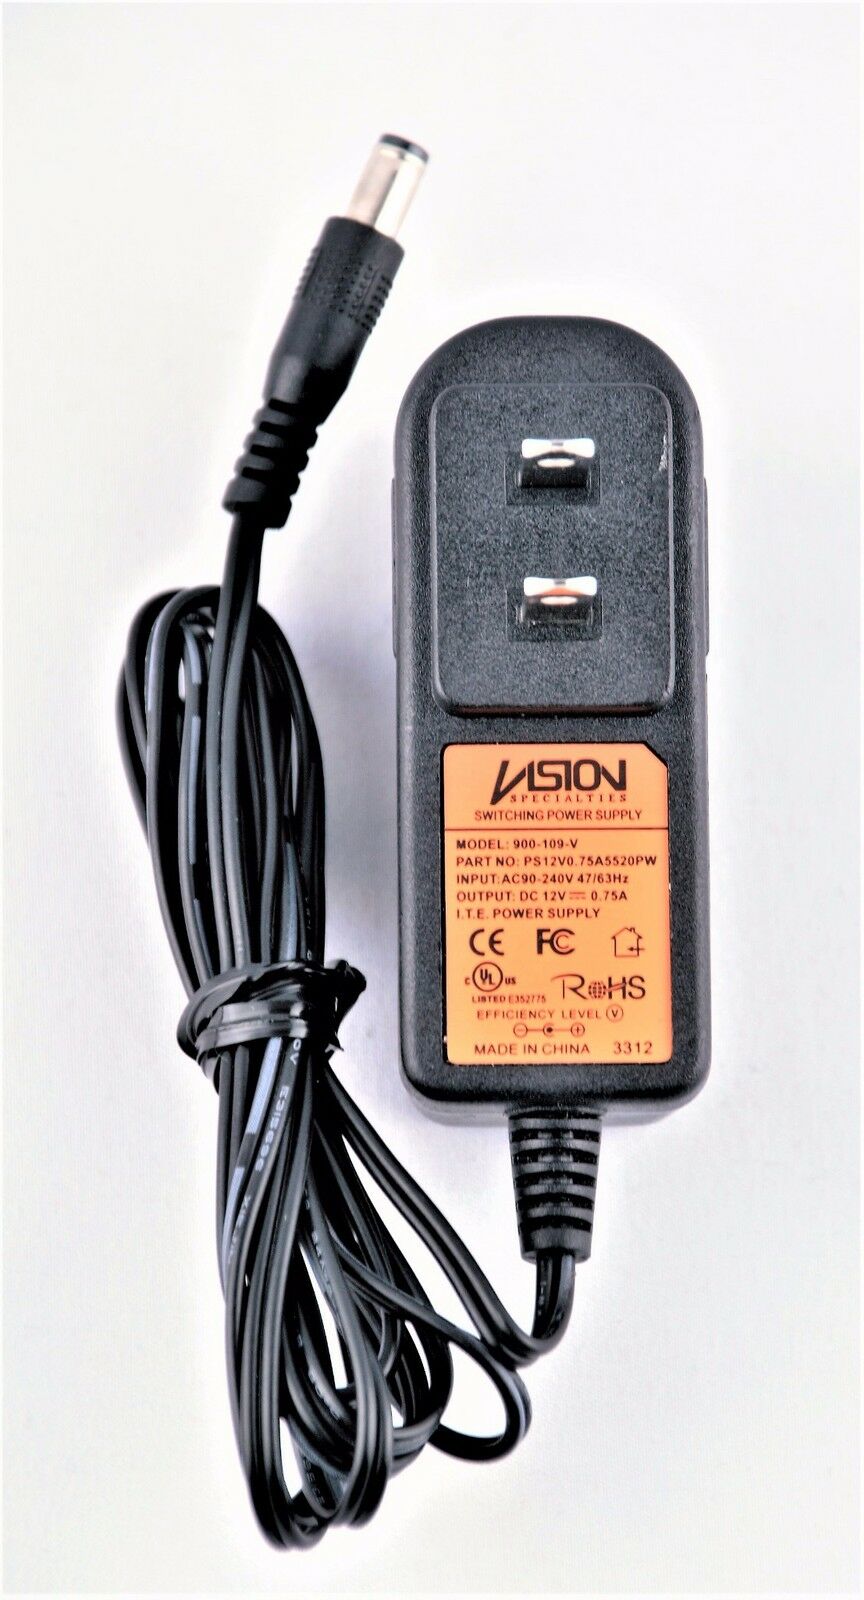 New VISION 900-109-V PS12V0.75A5520PW 12V 0.75A AC ADAPTER POWER CHARGER - Click Image to Close